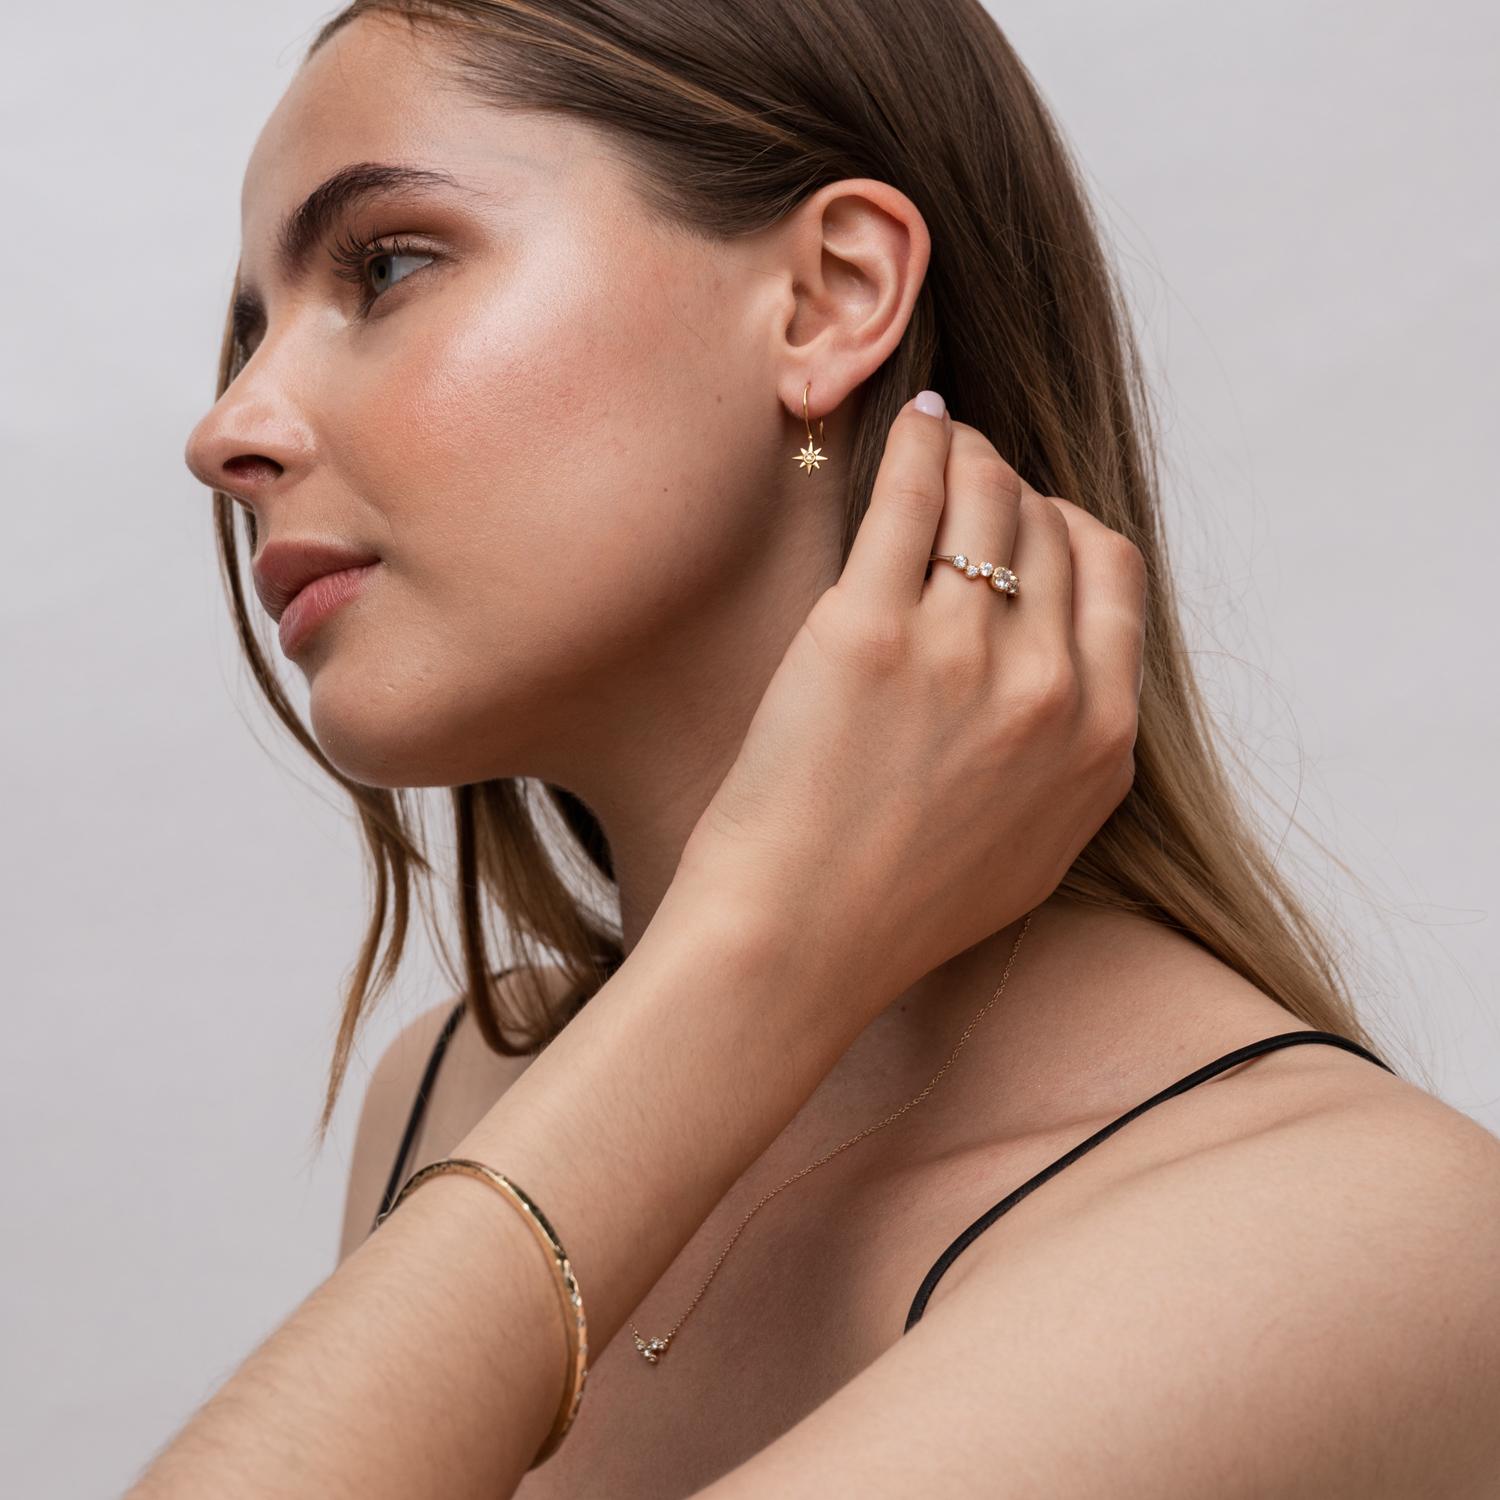 Our fine North Star range is a new collection of 14k Gold and Diamond guiding stars inspired by our ever-popular 'True North' Talisman designs.

Delicate eight pointed North Star ear-drops claw set with diamonds and hung on fine wires. These